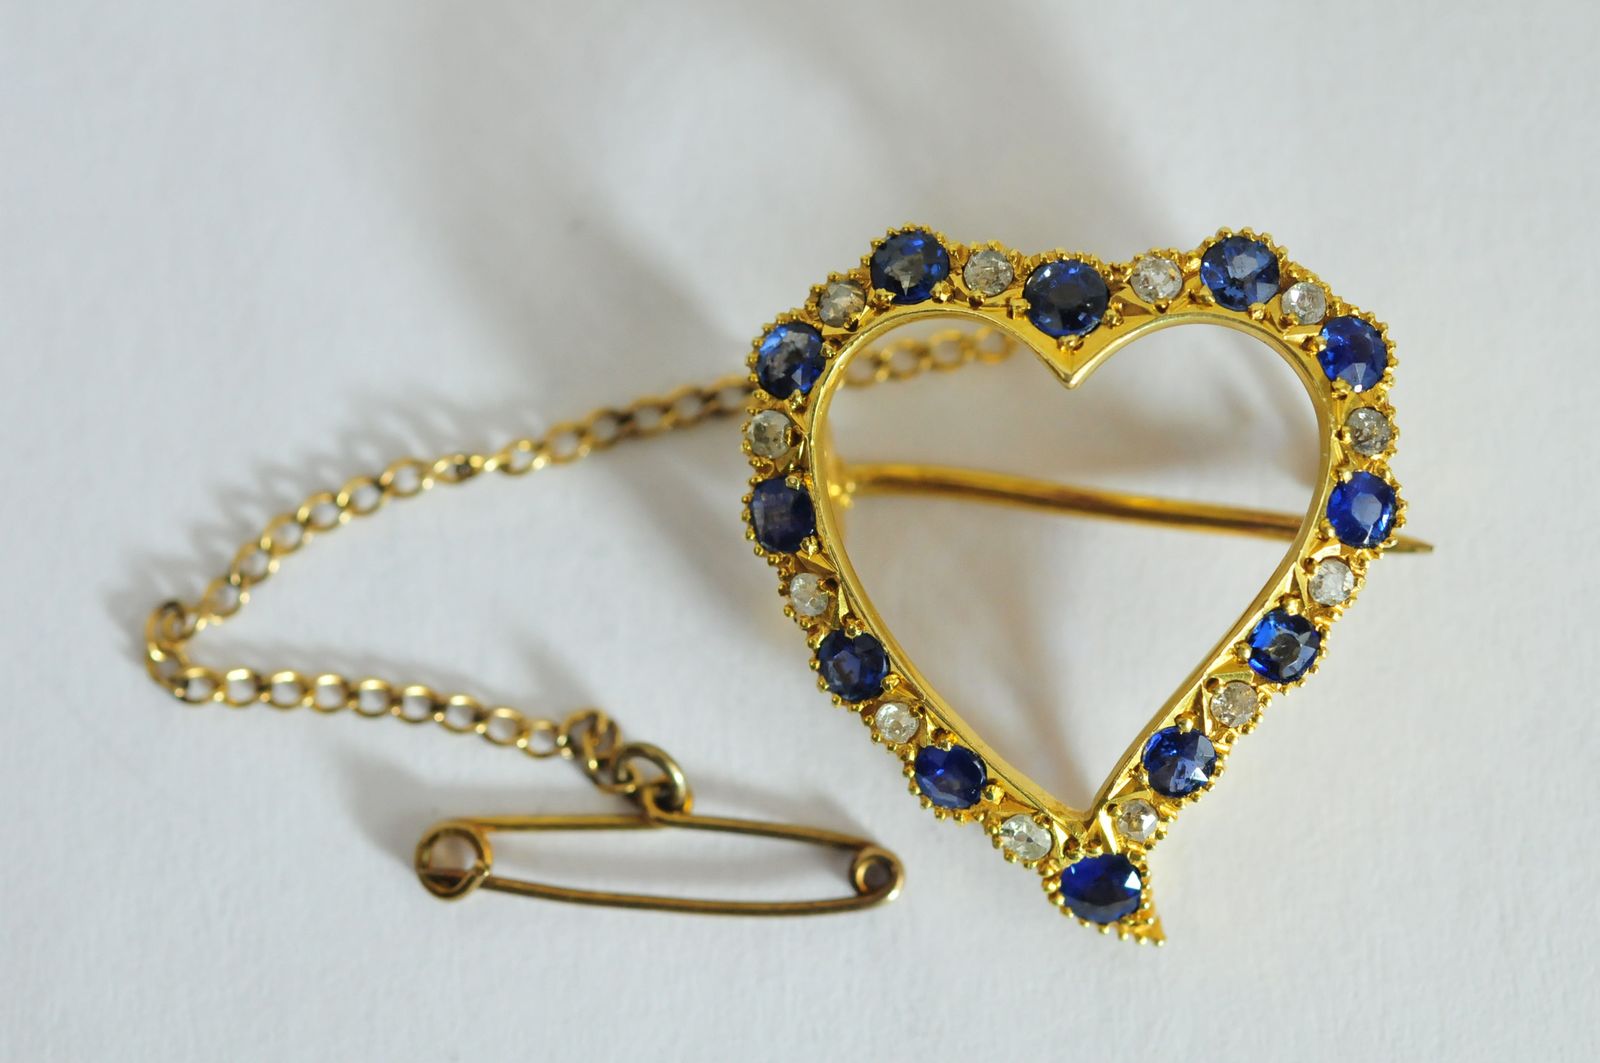 A ladies 15ct yellow gold heart shaped brooch set with alternating sapphires and diamonds